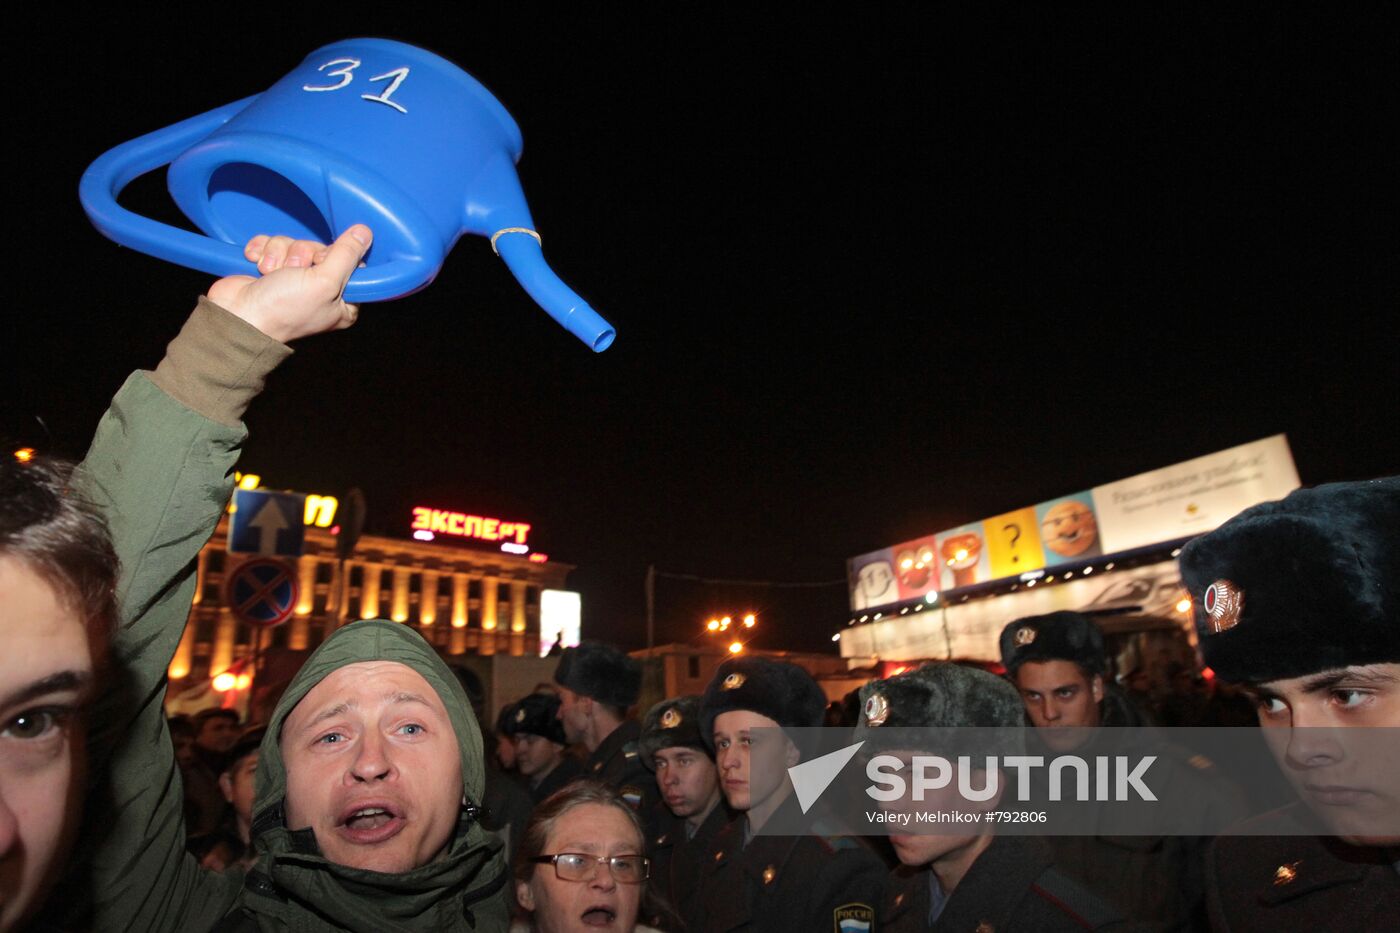 Rally in defense of 31st article of Russia's Constitution